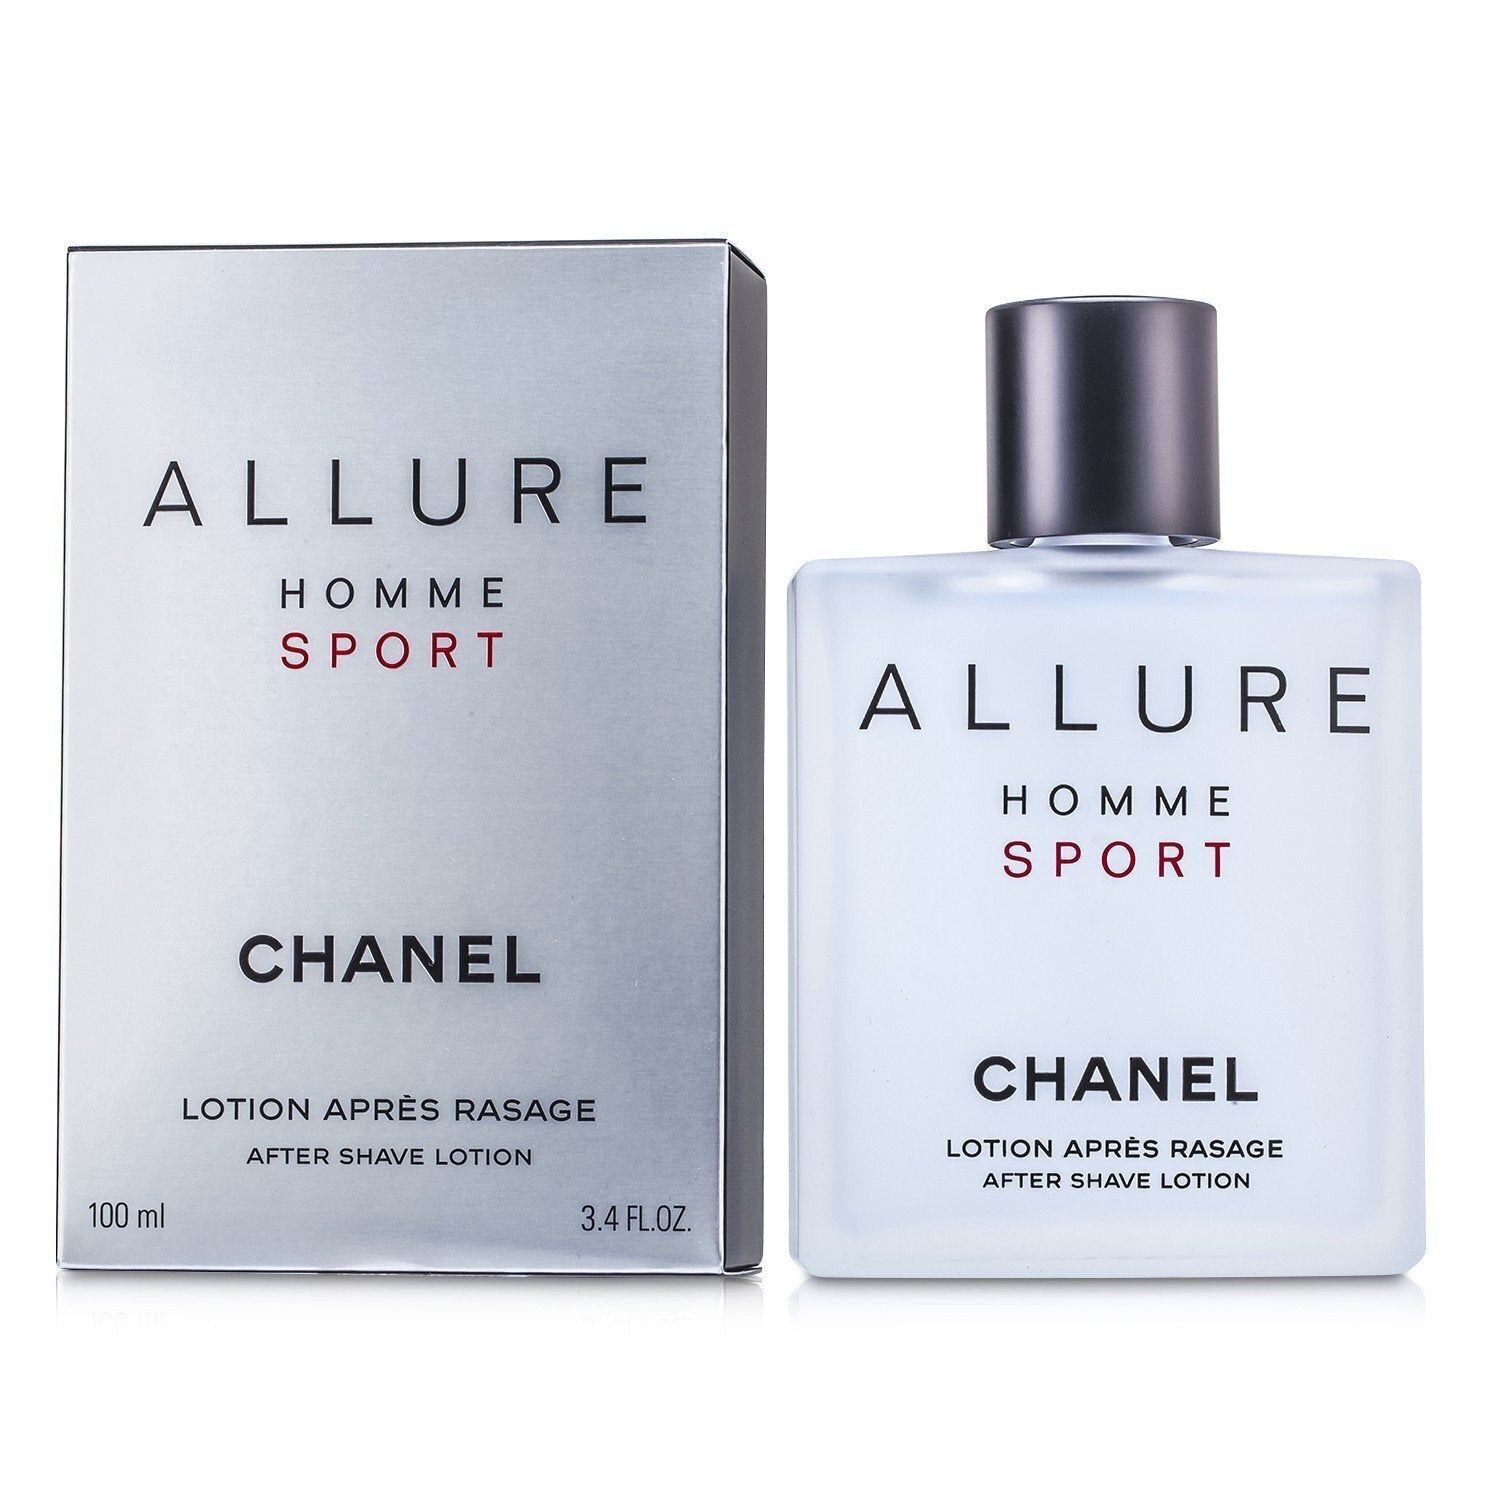 ALLURE HOMME SPORT Perfume - ALLURE HOMME SPORT by Chanel